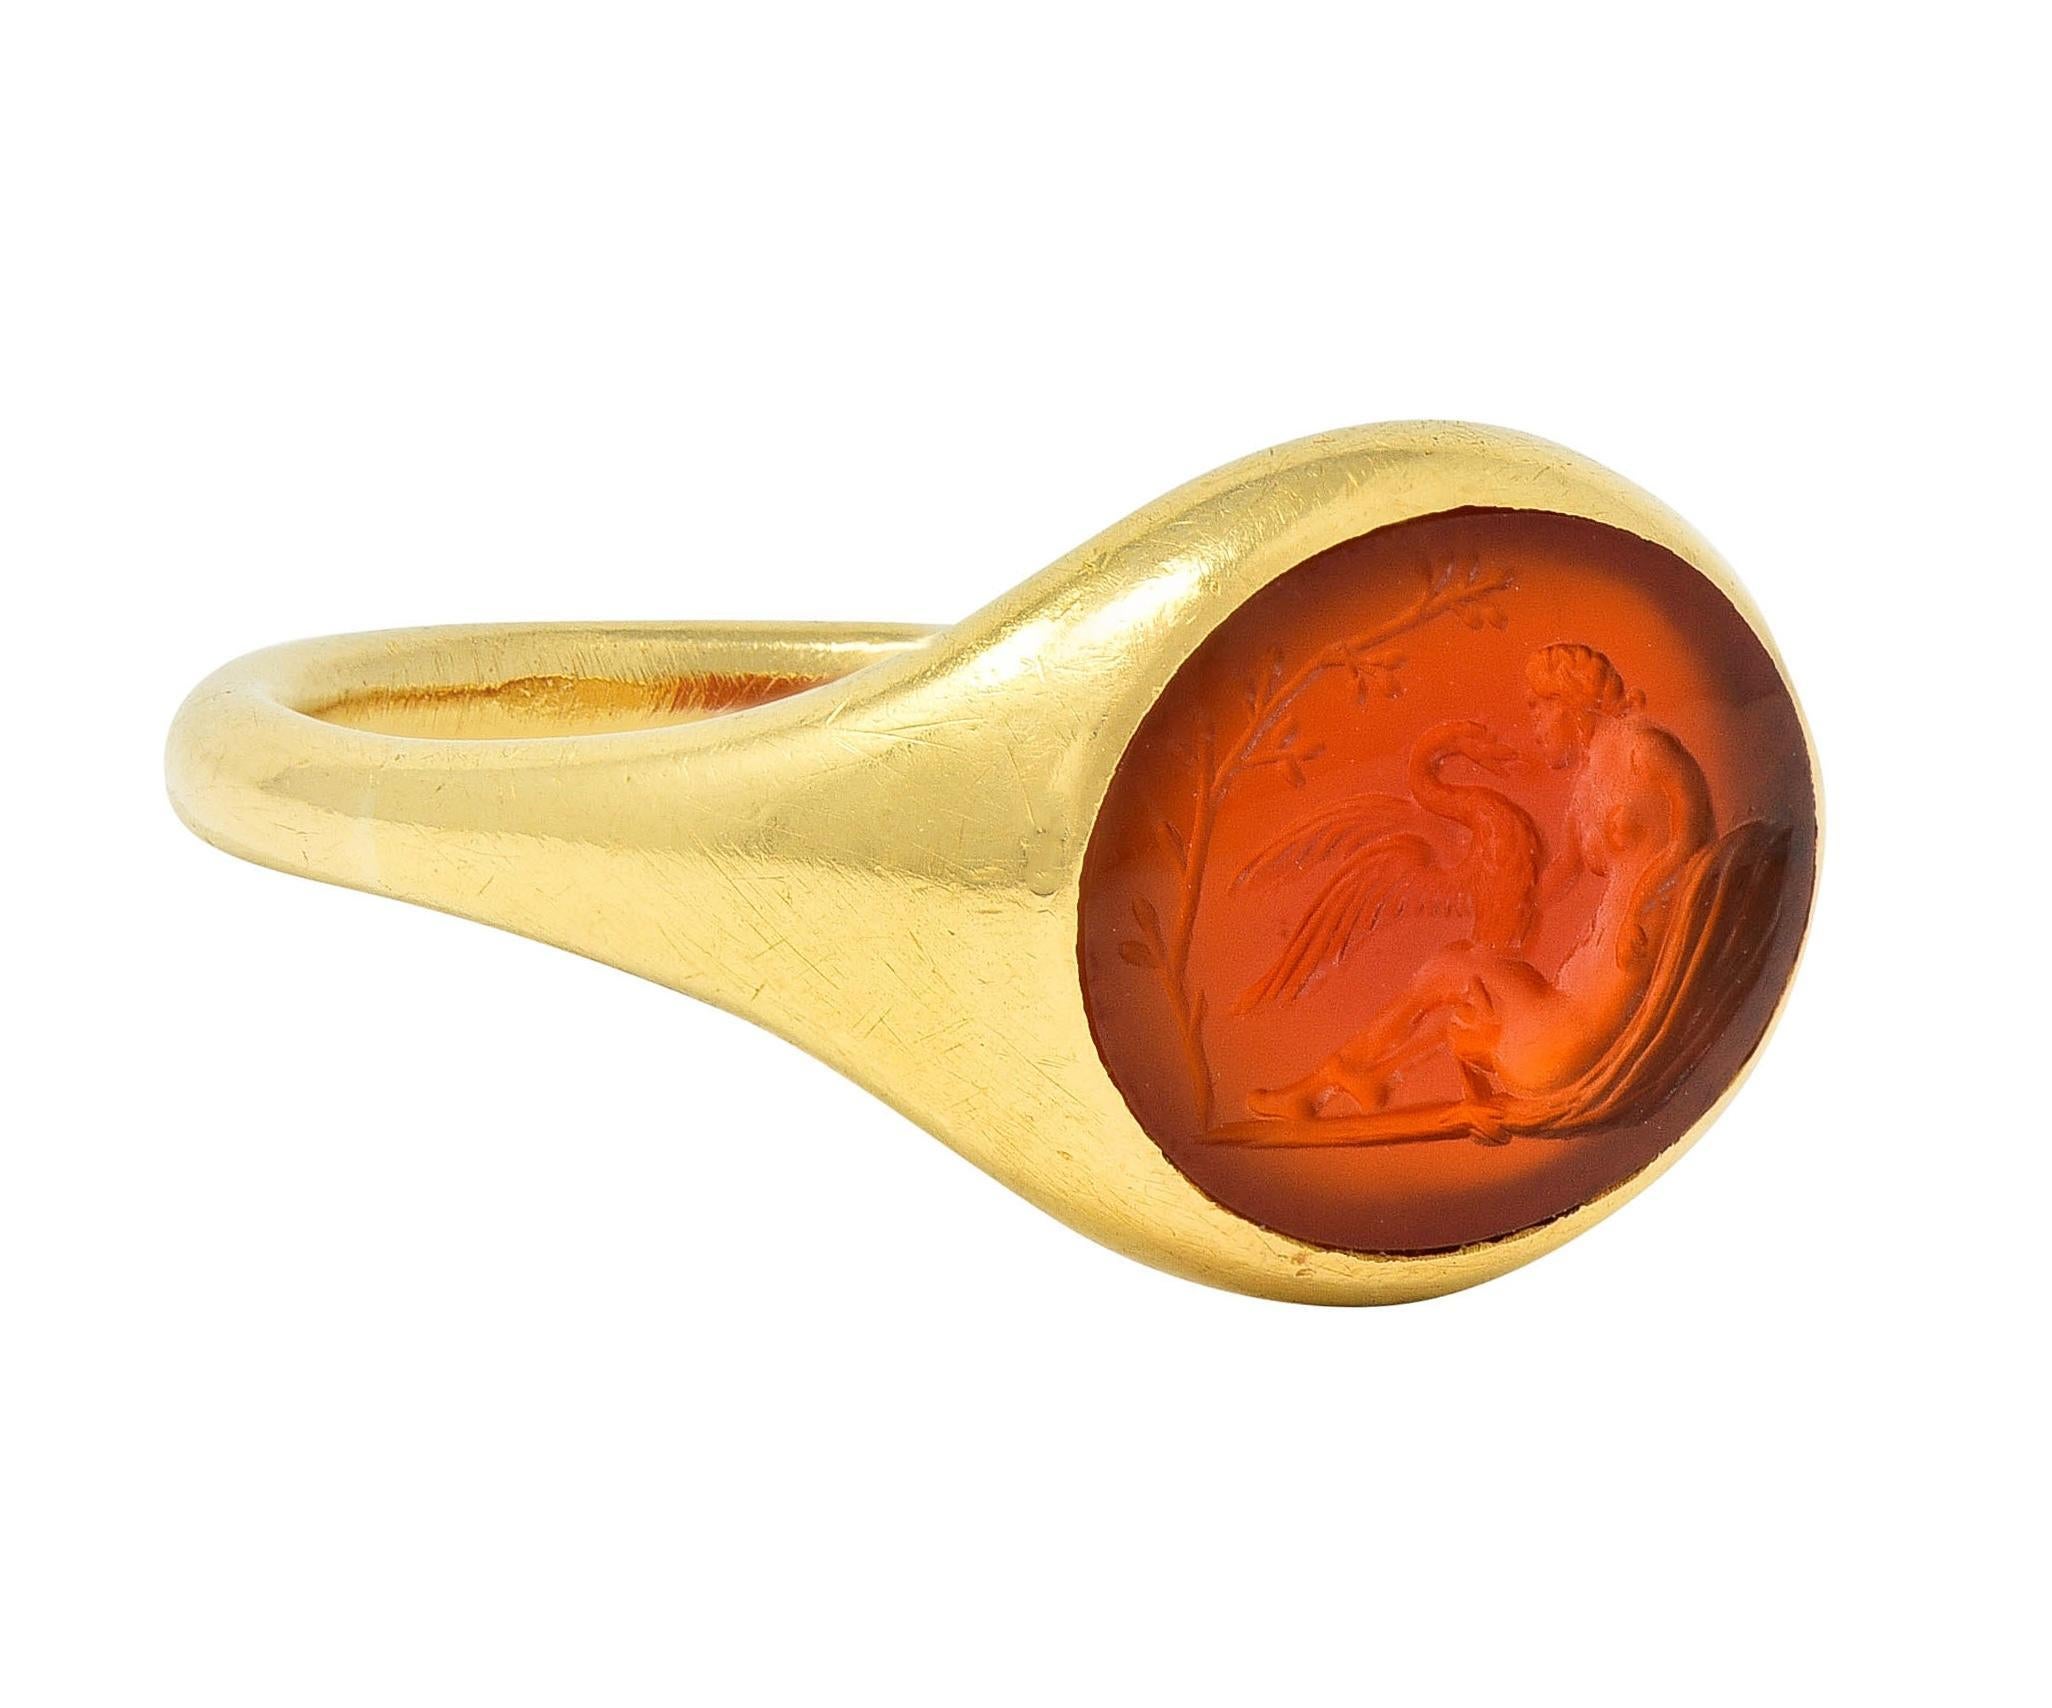 Centering an oval-shaped carnelian tablet carved with intaglio depicting a woman and swan
Based on the Greek myth of the figure Leda and The Swan (Zeus) 
Translucent reddish-orange and measuring 10.0 x 13.0 mm 
Flush set with a contoured gold